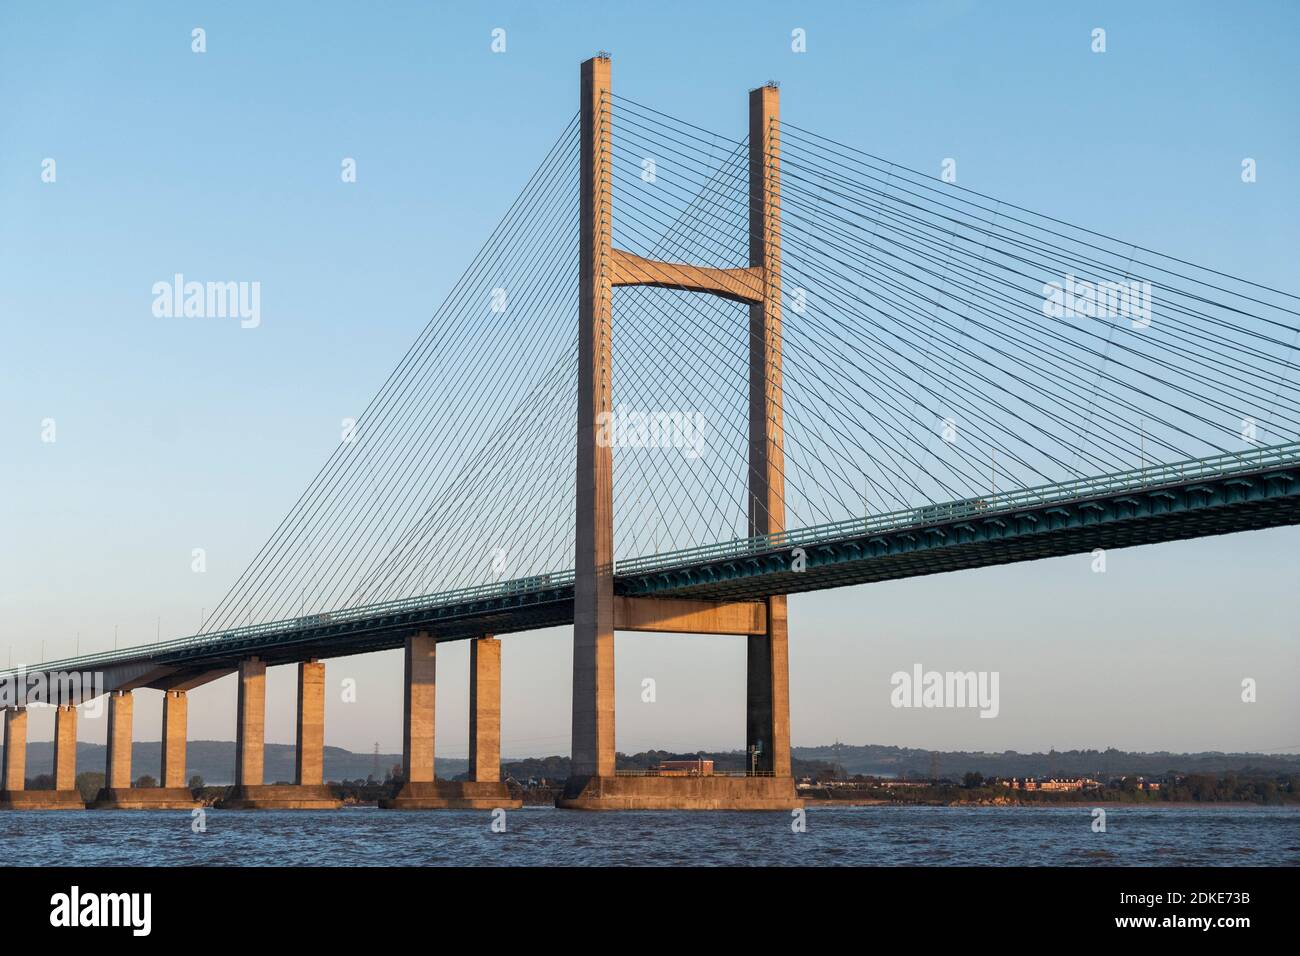 The Second Severn Crossing —officially renamed the Prince of Wales Bridge —is the M4 motorway bridge over the River Severn between England and Wales. Stock Photo